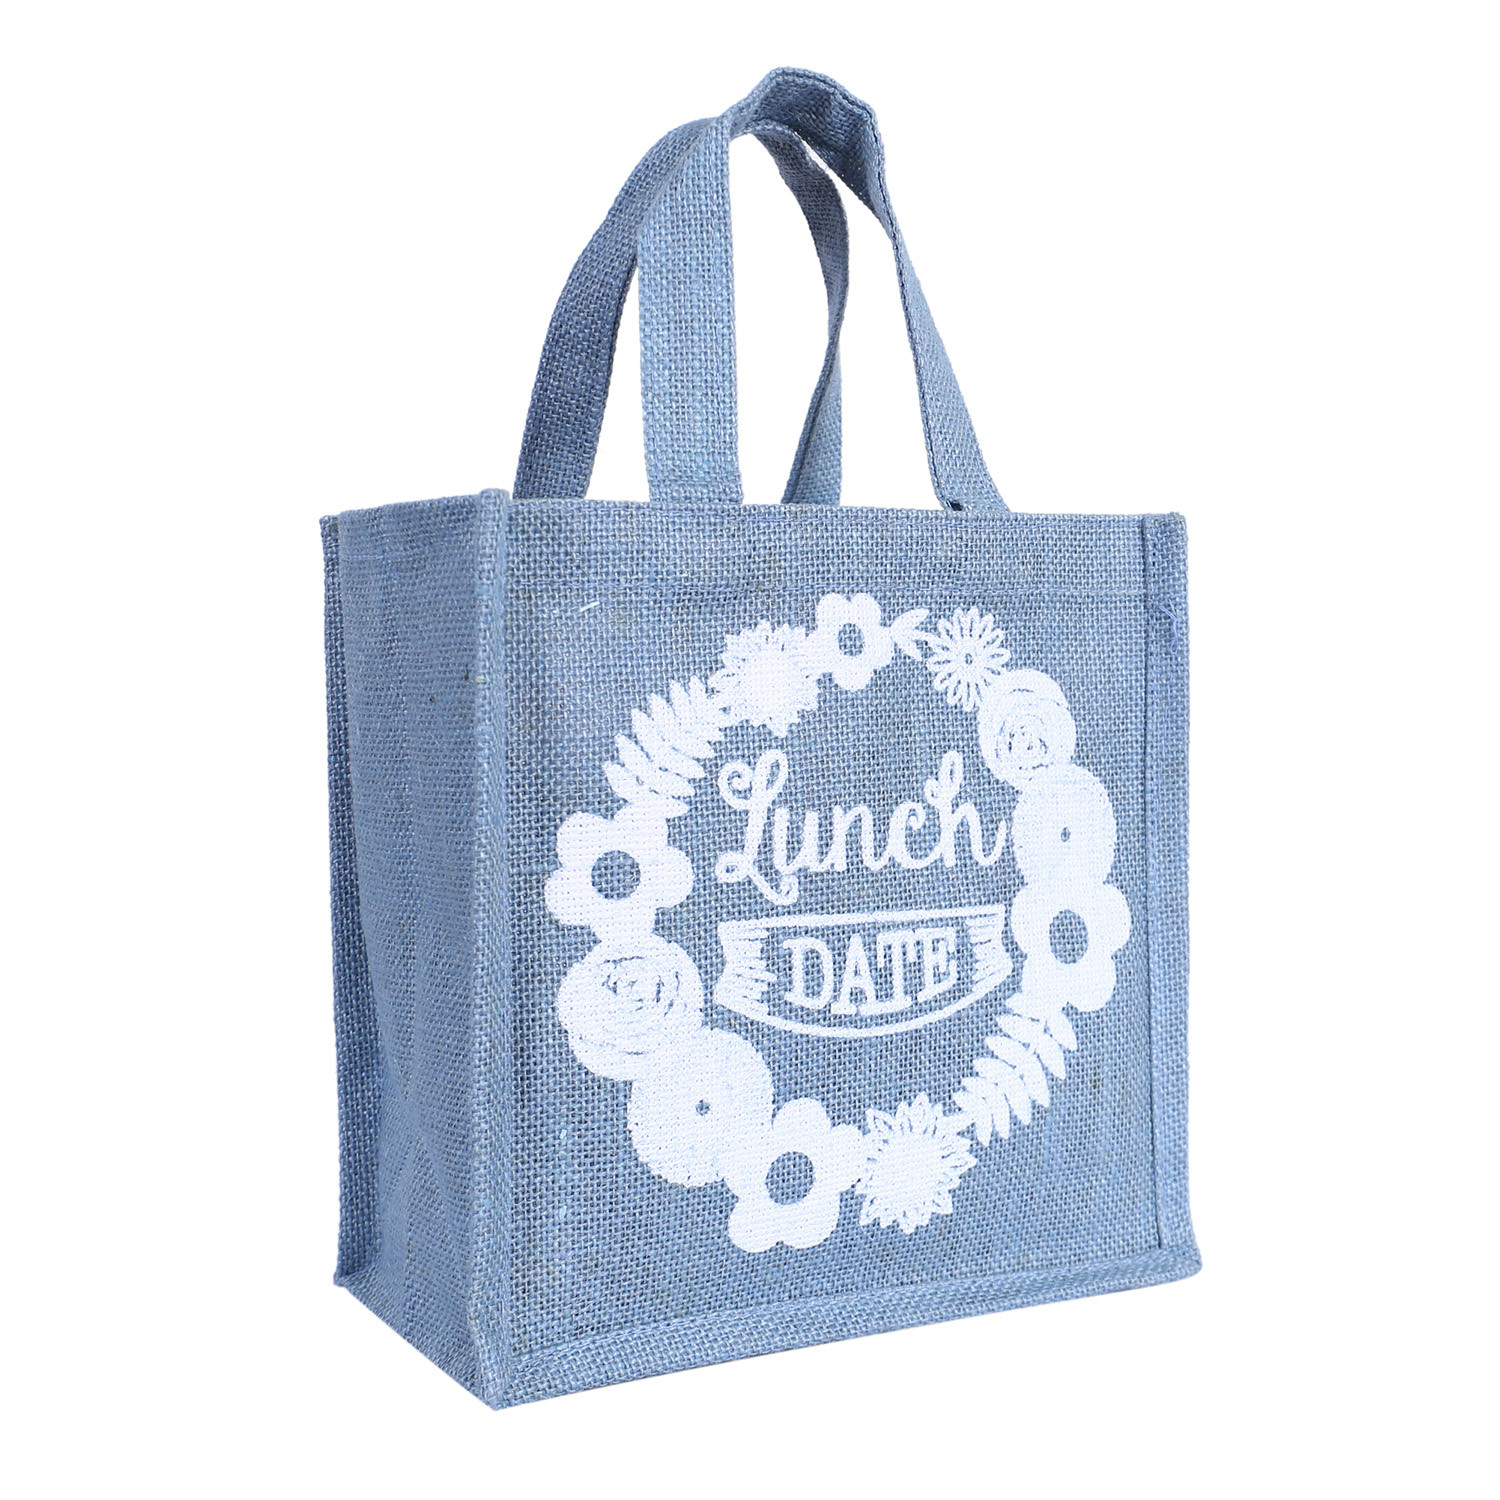 Kuber Industries Lunch Bag|Reusable Jute Fabric Tote Bag|Lunch Date Print Tiffin Carry Hand bag with Handle For office,School,Gift (Gray)